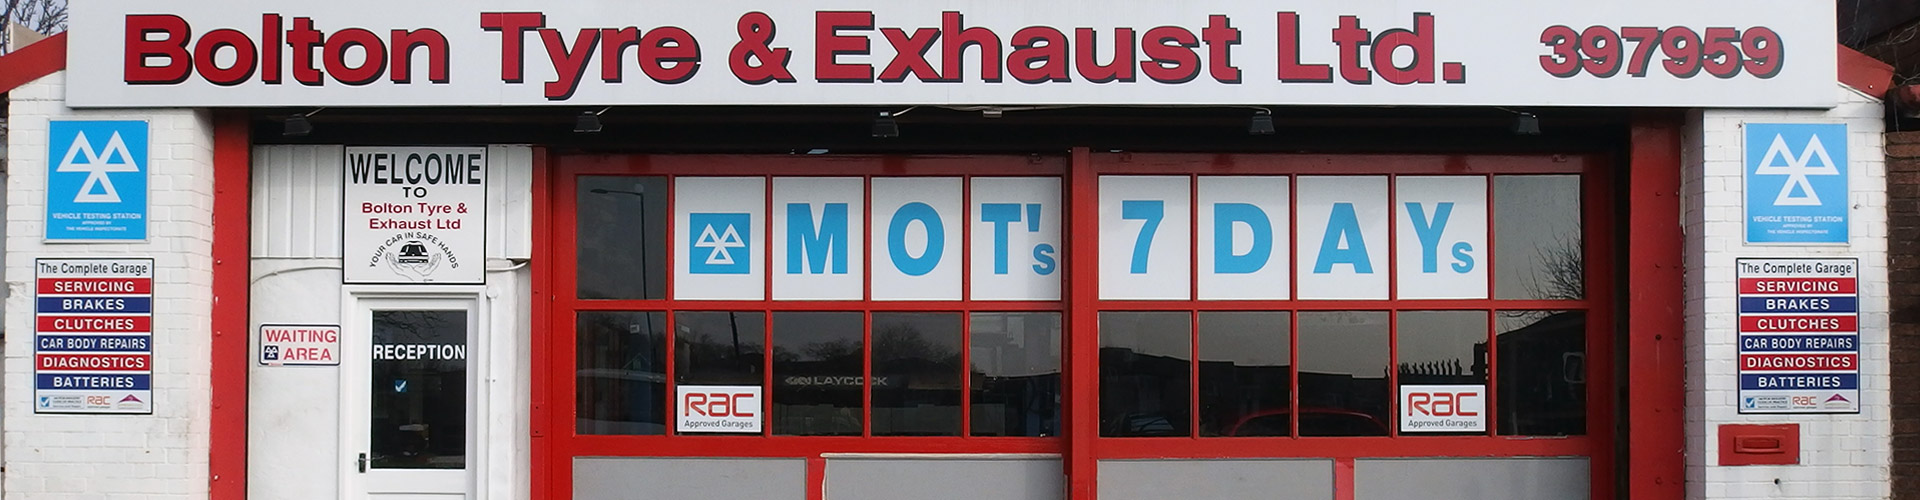 Bolton Tyre and Exhaust Ltd